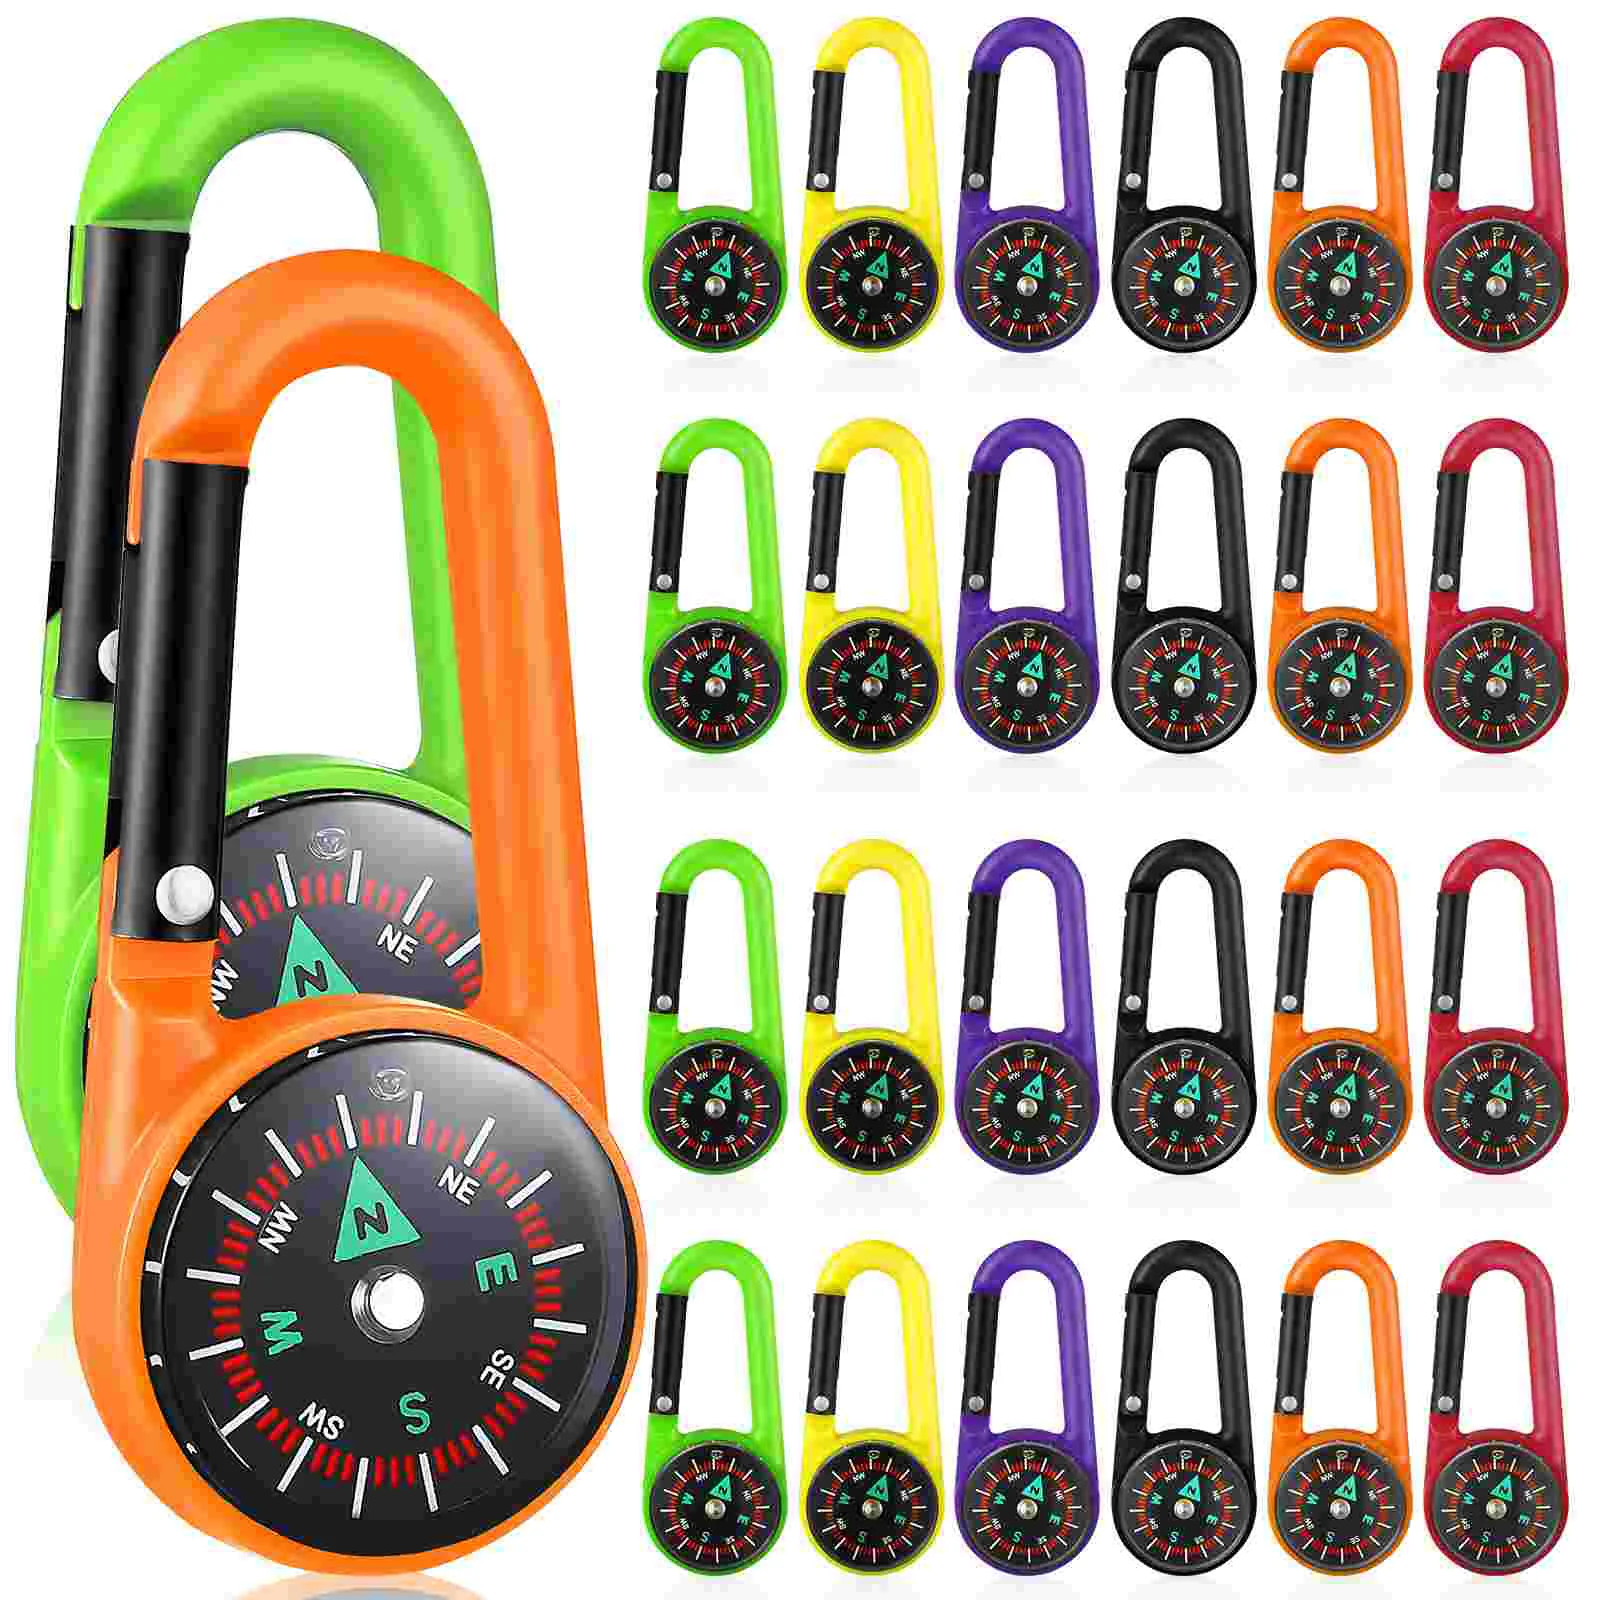 

24 Pcs Plastic Compass Guide Key Fob Clip-on Small Mountaineering Equipment Climbing Carabiner Camping Travel